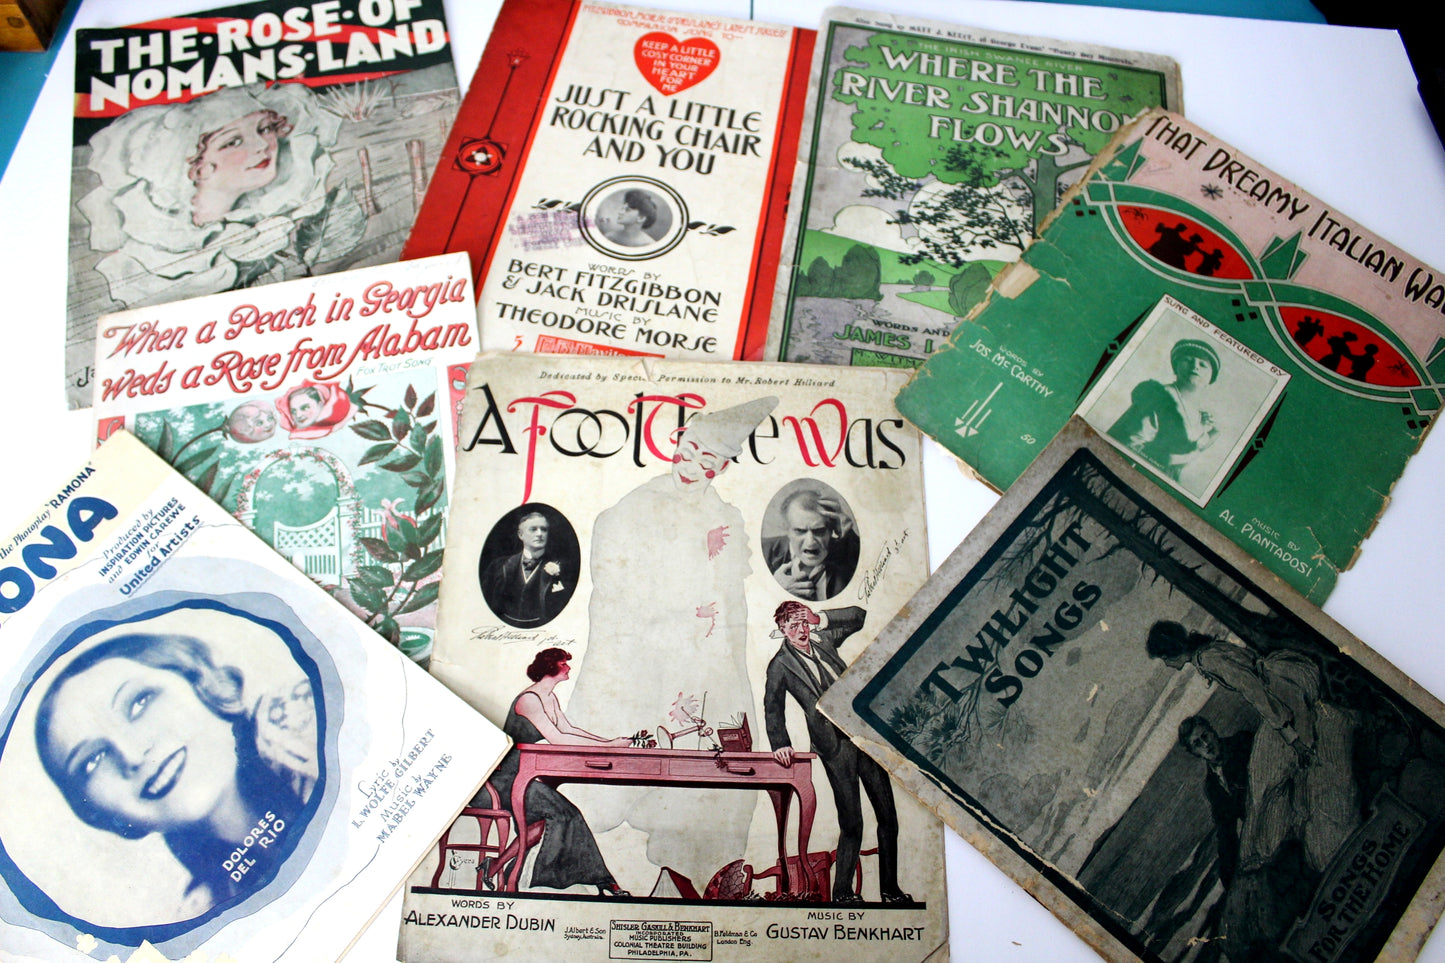 Collection 100+ Antique Vintage 1920s WW1 Romantic Sheet Music Song Books Music Use Papercraft DIY river shannon twilight songs